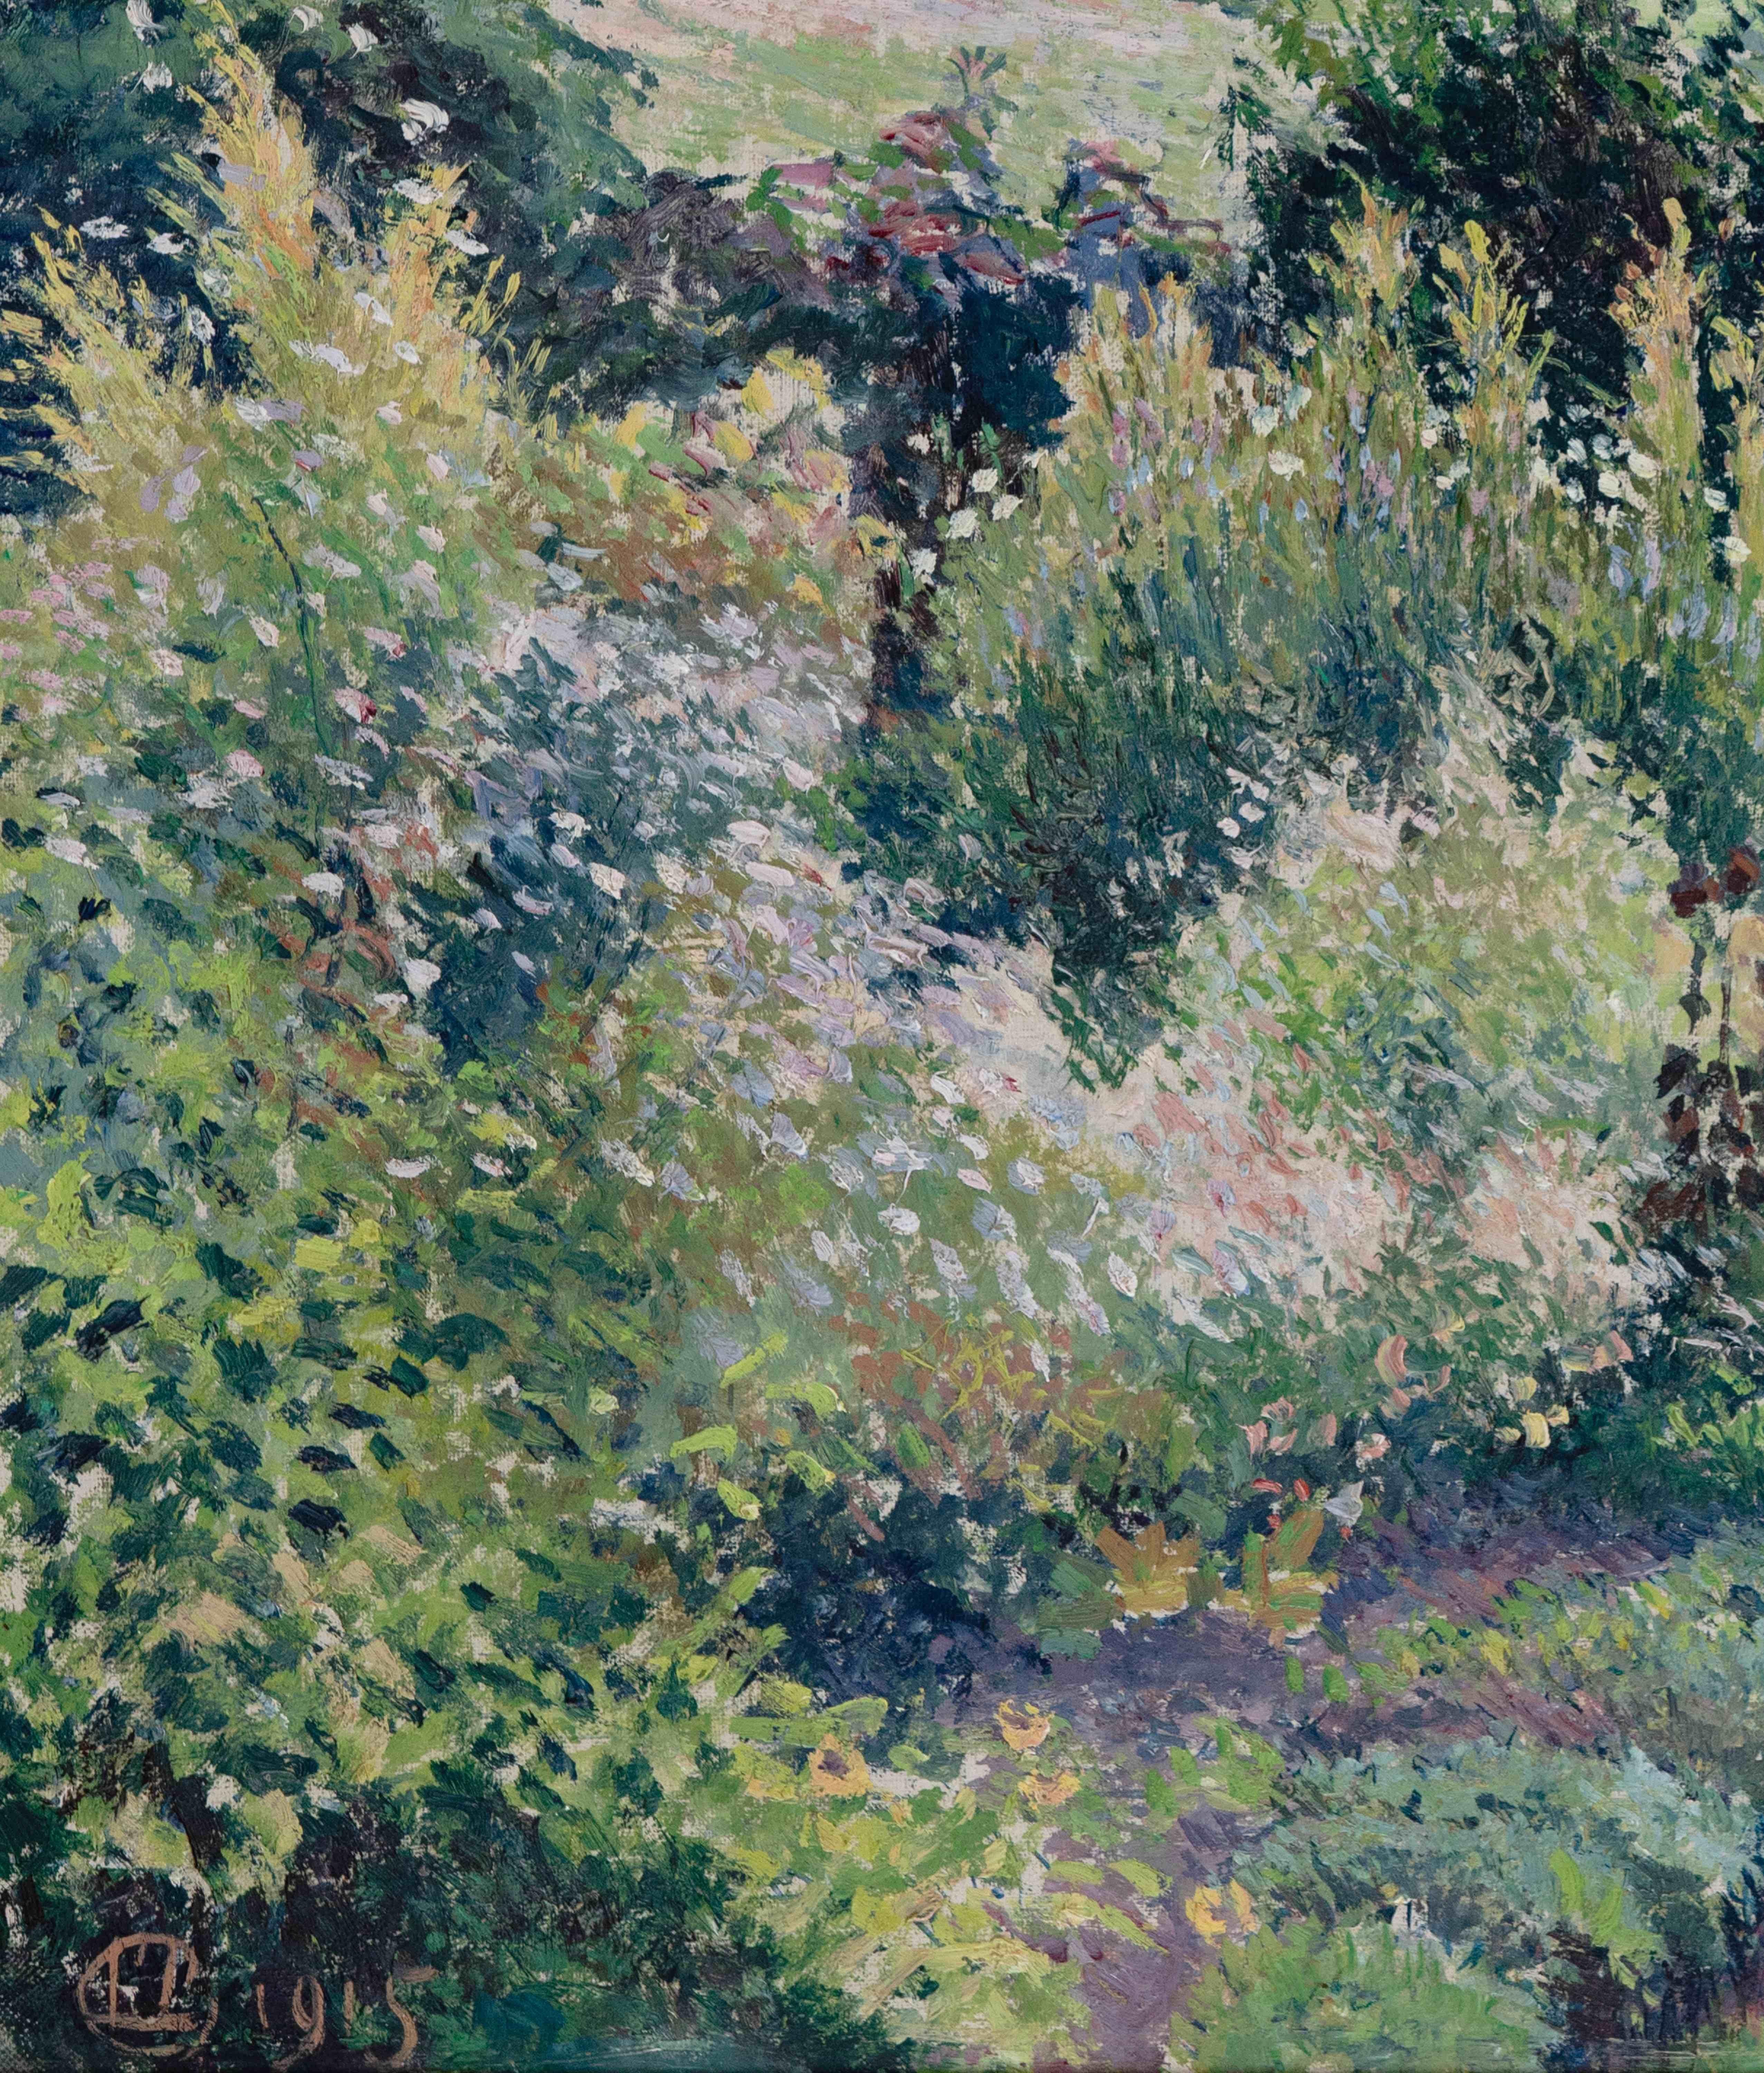 Garden in Autumn, Fishpond by Lucien Pissarro - Landscape painting For Sale 4